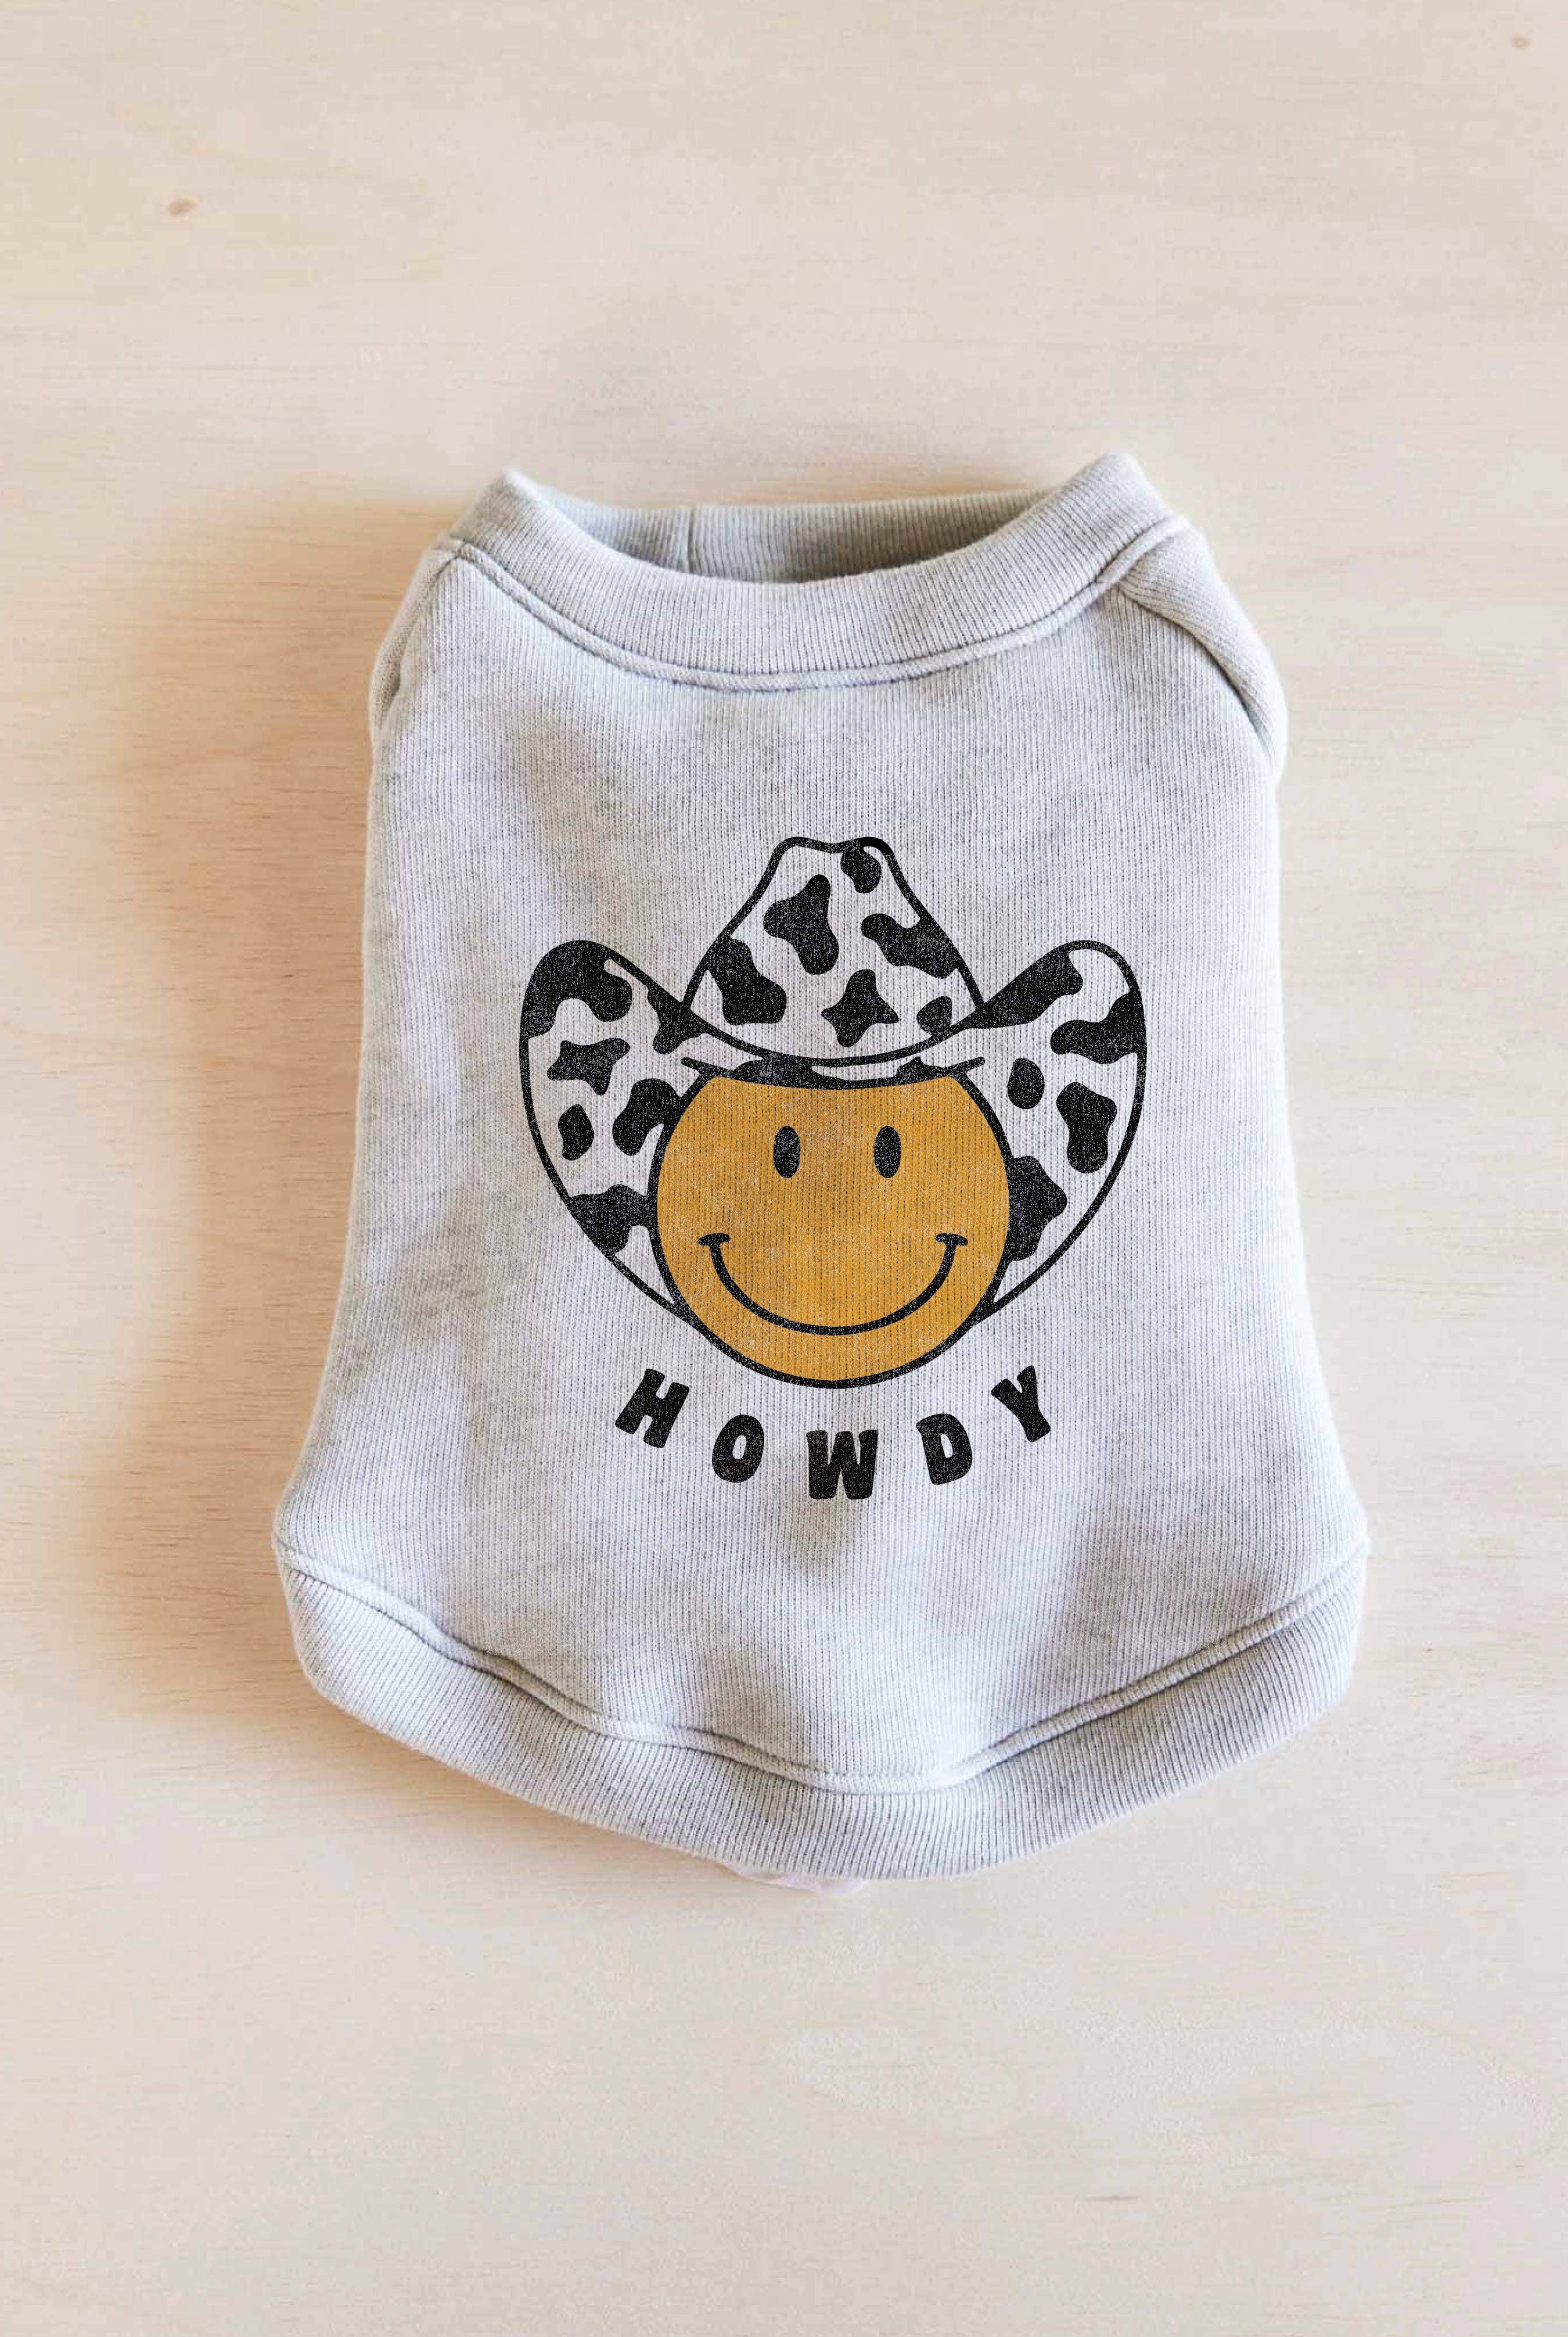 OAT COLLECTIVE - HOWDY SMILEY FACE Pet Graphic Sweatshirt